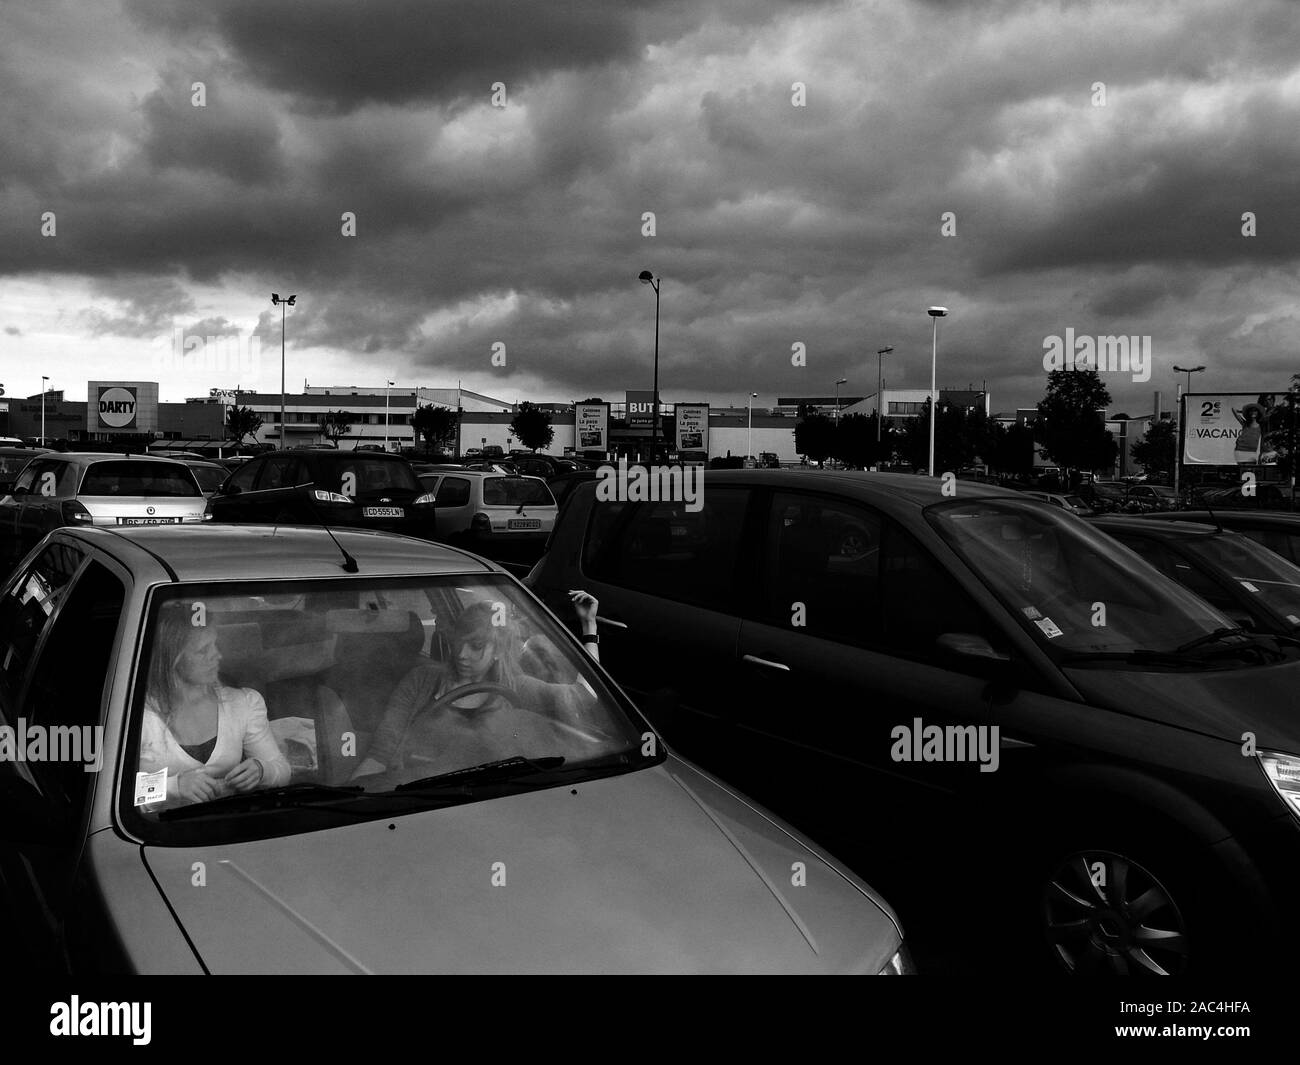 AJAXNETPHOTO. GLISY, FRANCE. - RAIN CLOUDS APPROACHING - TWO PEOPLE ENGAGED IN CONVERSATION IN A CAR IN AN OUT OF TOWN RETAIL SITE CAR PARK.PHOTO:JONATHAN EASTLAND/AJAX REF:GR121506 BW3638 Stock Photo